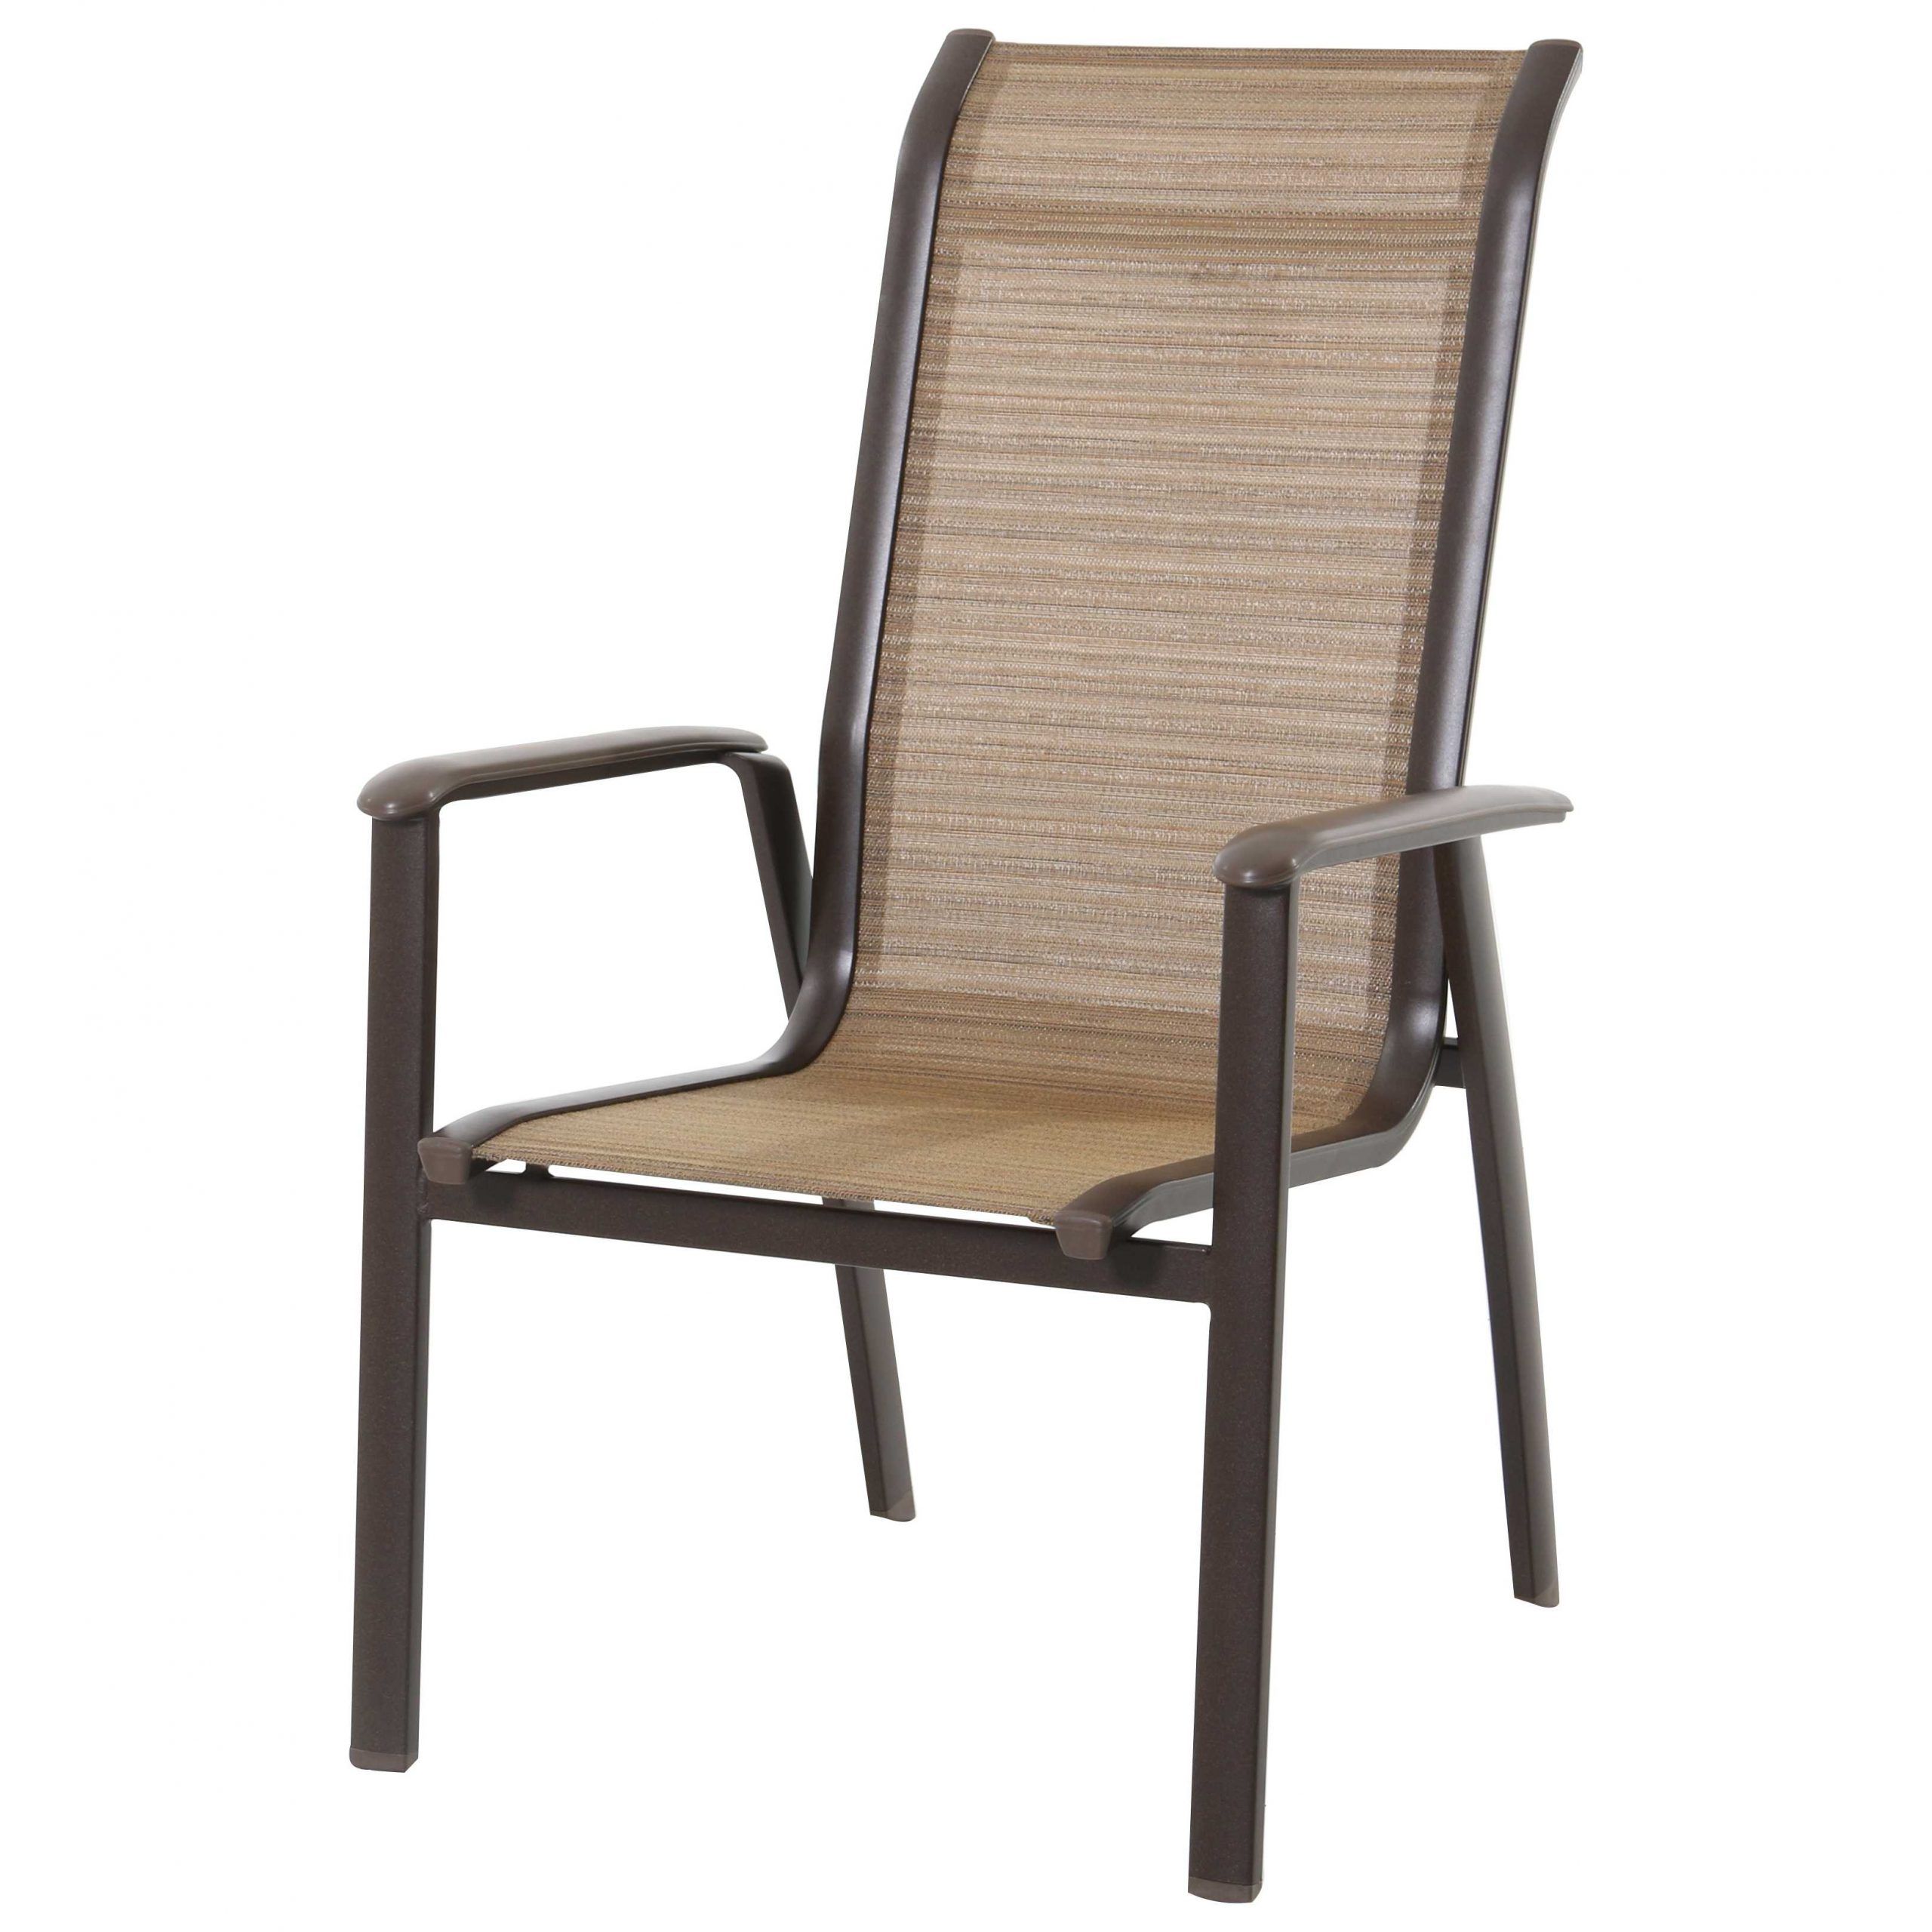 Most Popular Sunvilla Florence Sling Aluminum Chair Stackable In Weyburn Tan In Steel Arm Outdoor Aluminum Chaise Sets (View 12 of 15)